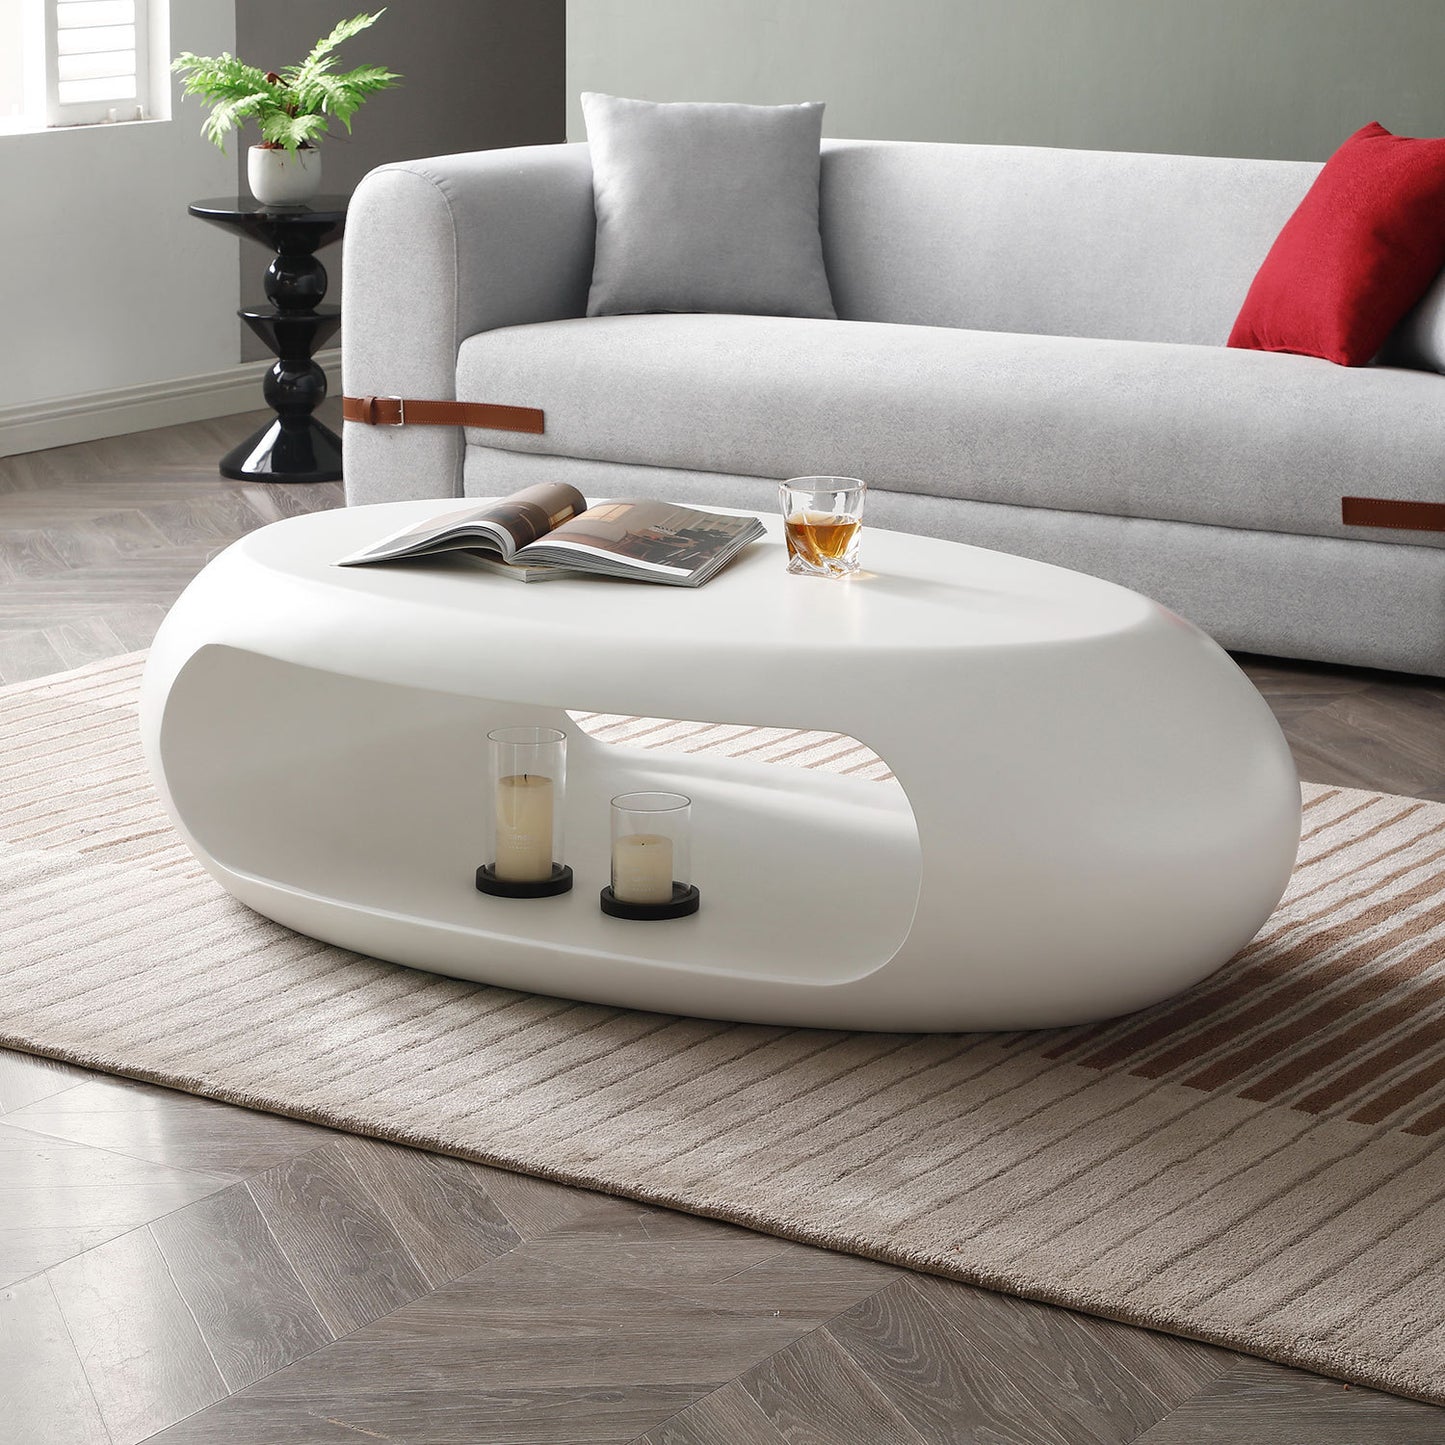 Elegant 53.15 Oval Fiberglass Coffee Table for Living Room in White, Ready-To-Use